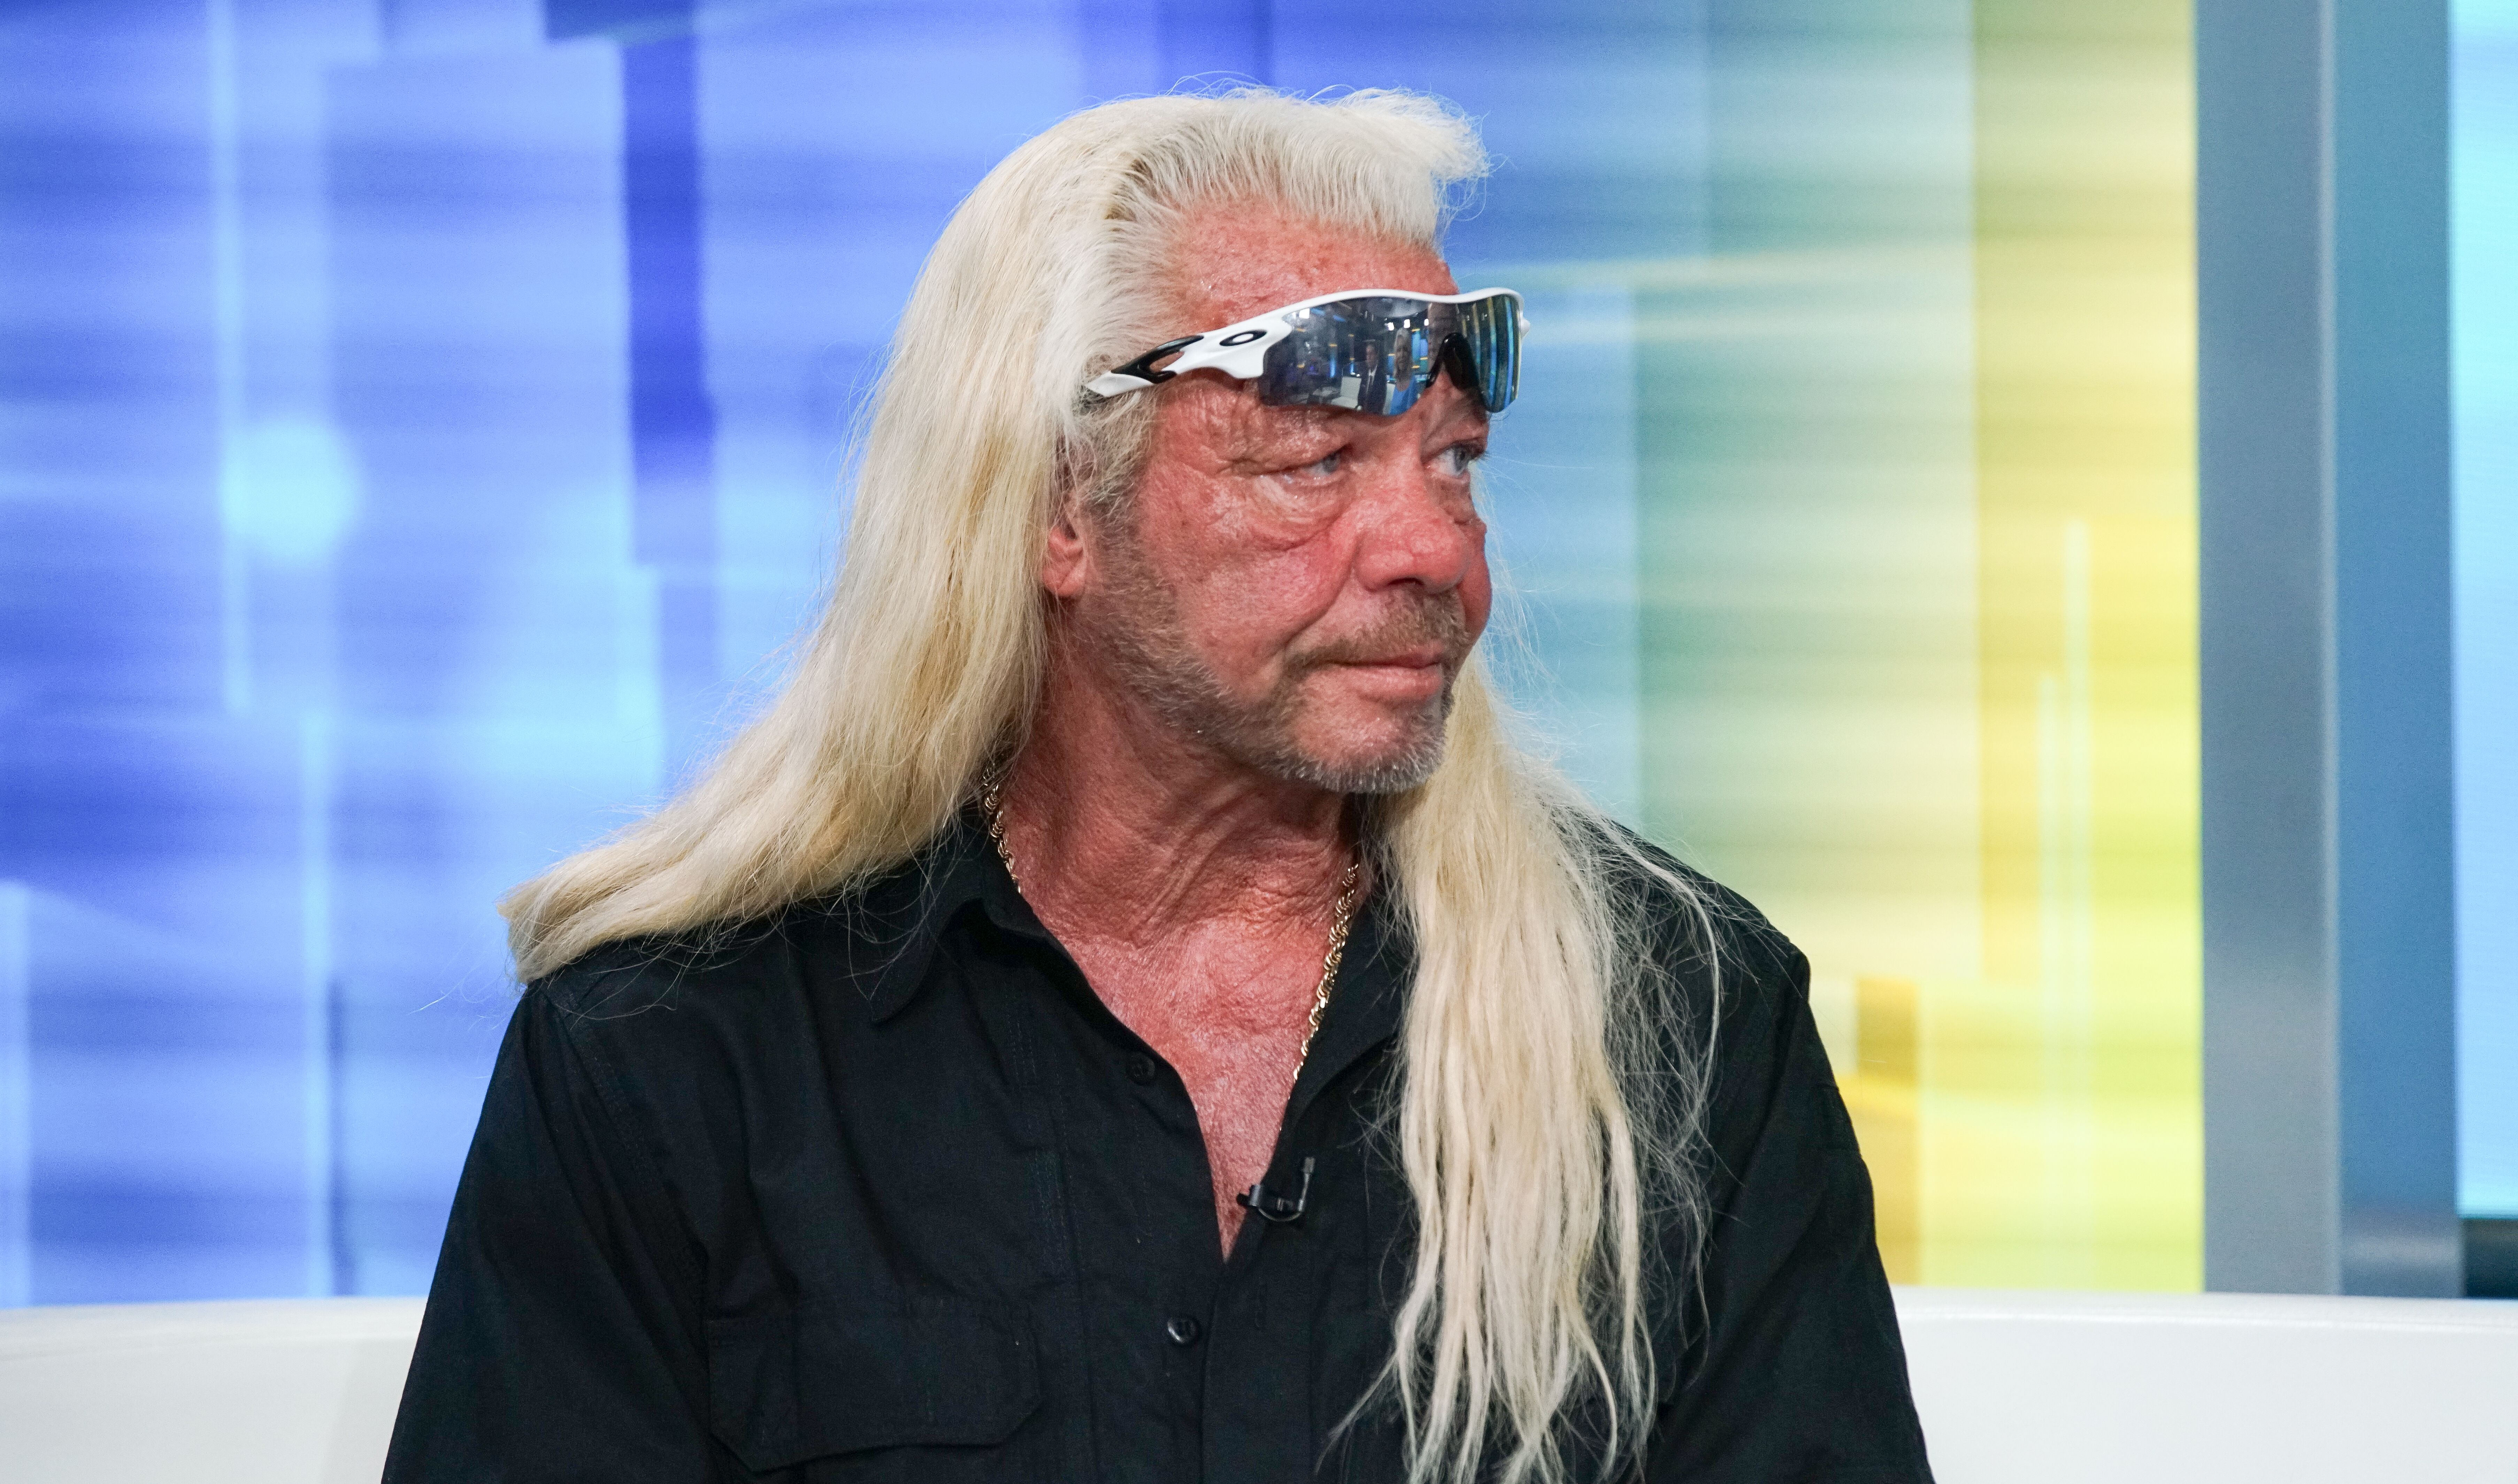 Duane Chapman visits "FOX & Friends" at FOX Studios on August 28, 2019, in New York City | Photo: Getty Images